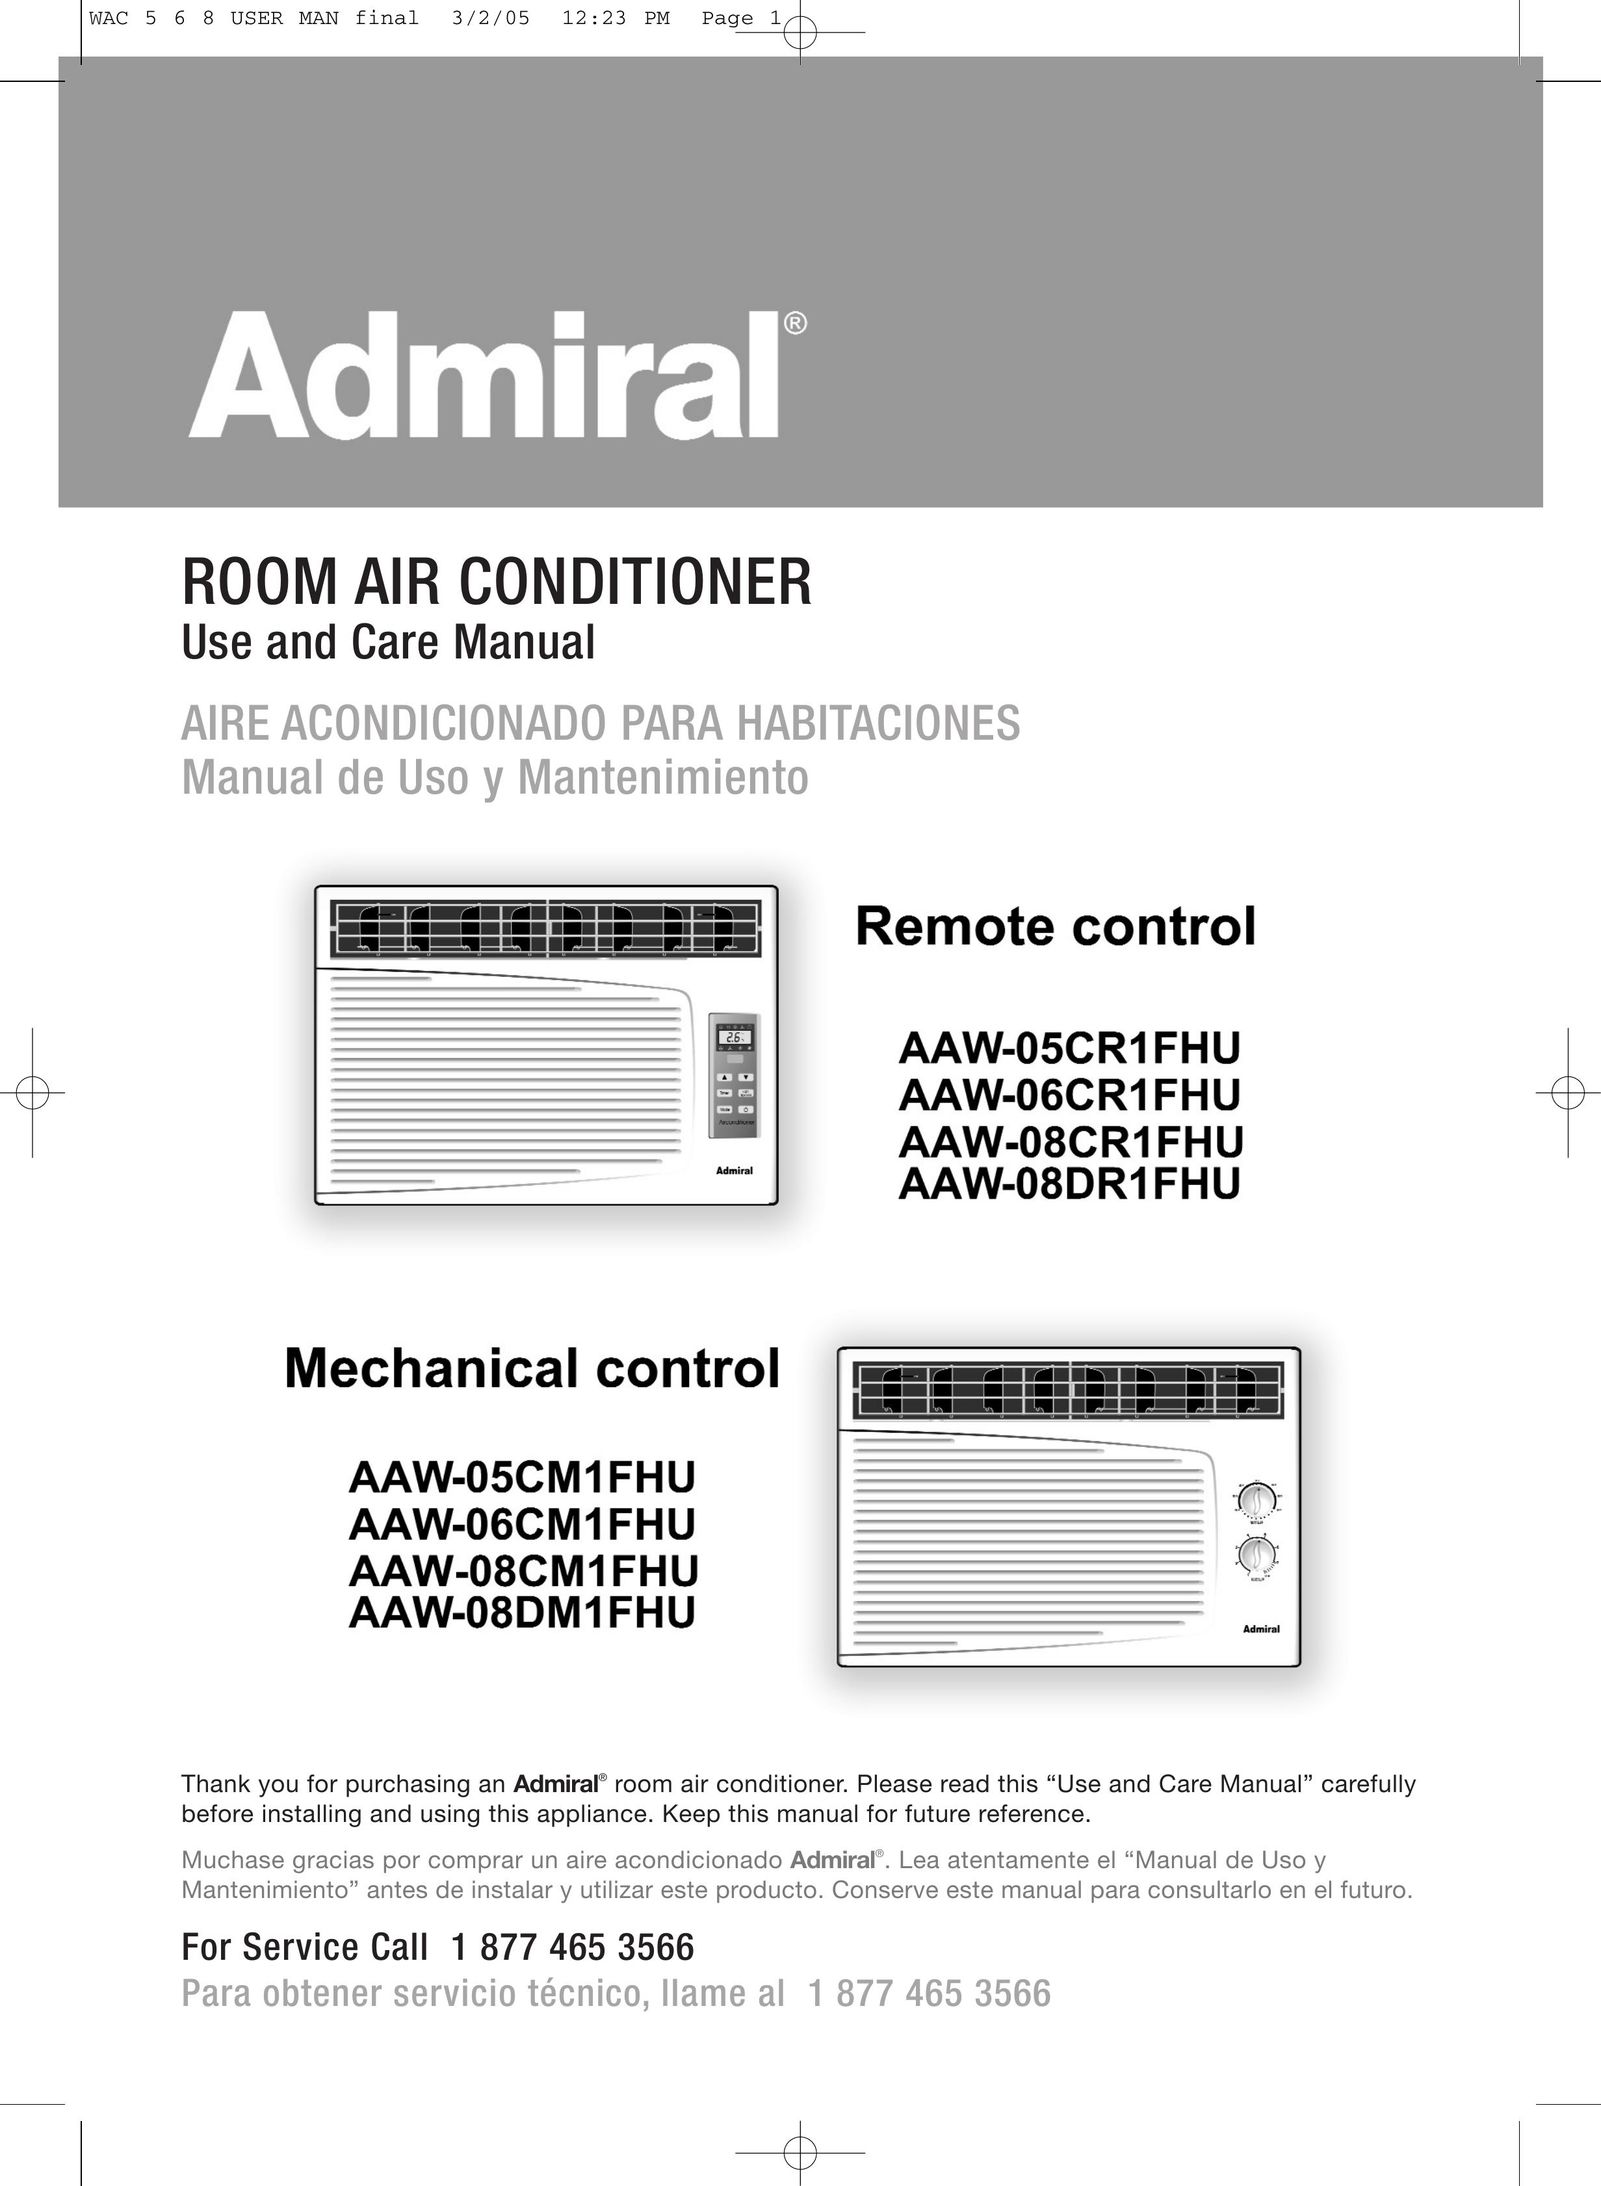 Admiral AAW-05CM1FHU Air Conditioner User Manual (Page 1)